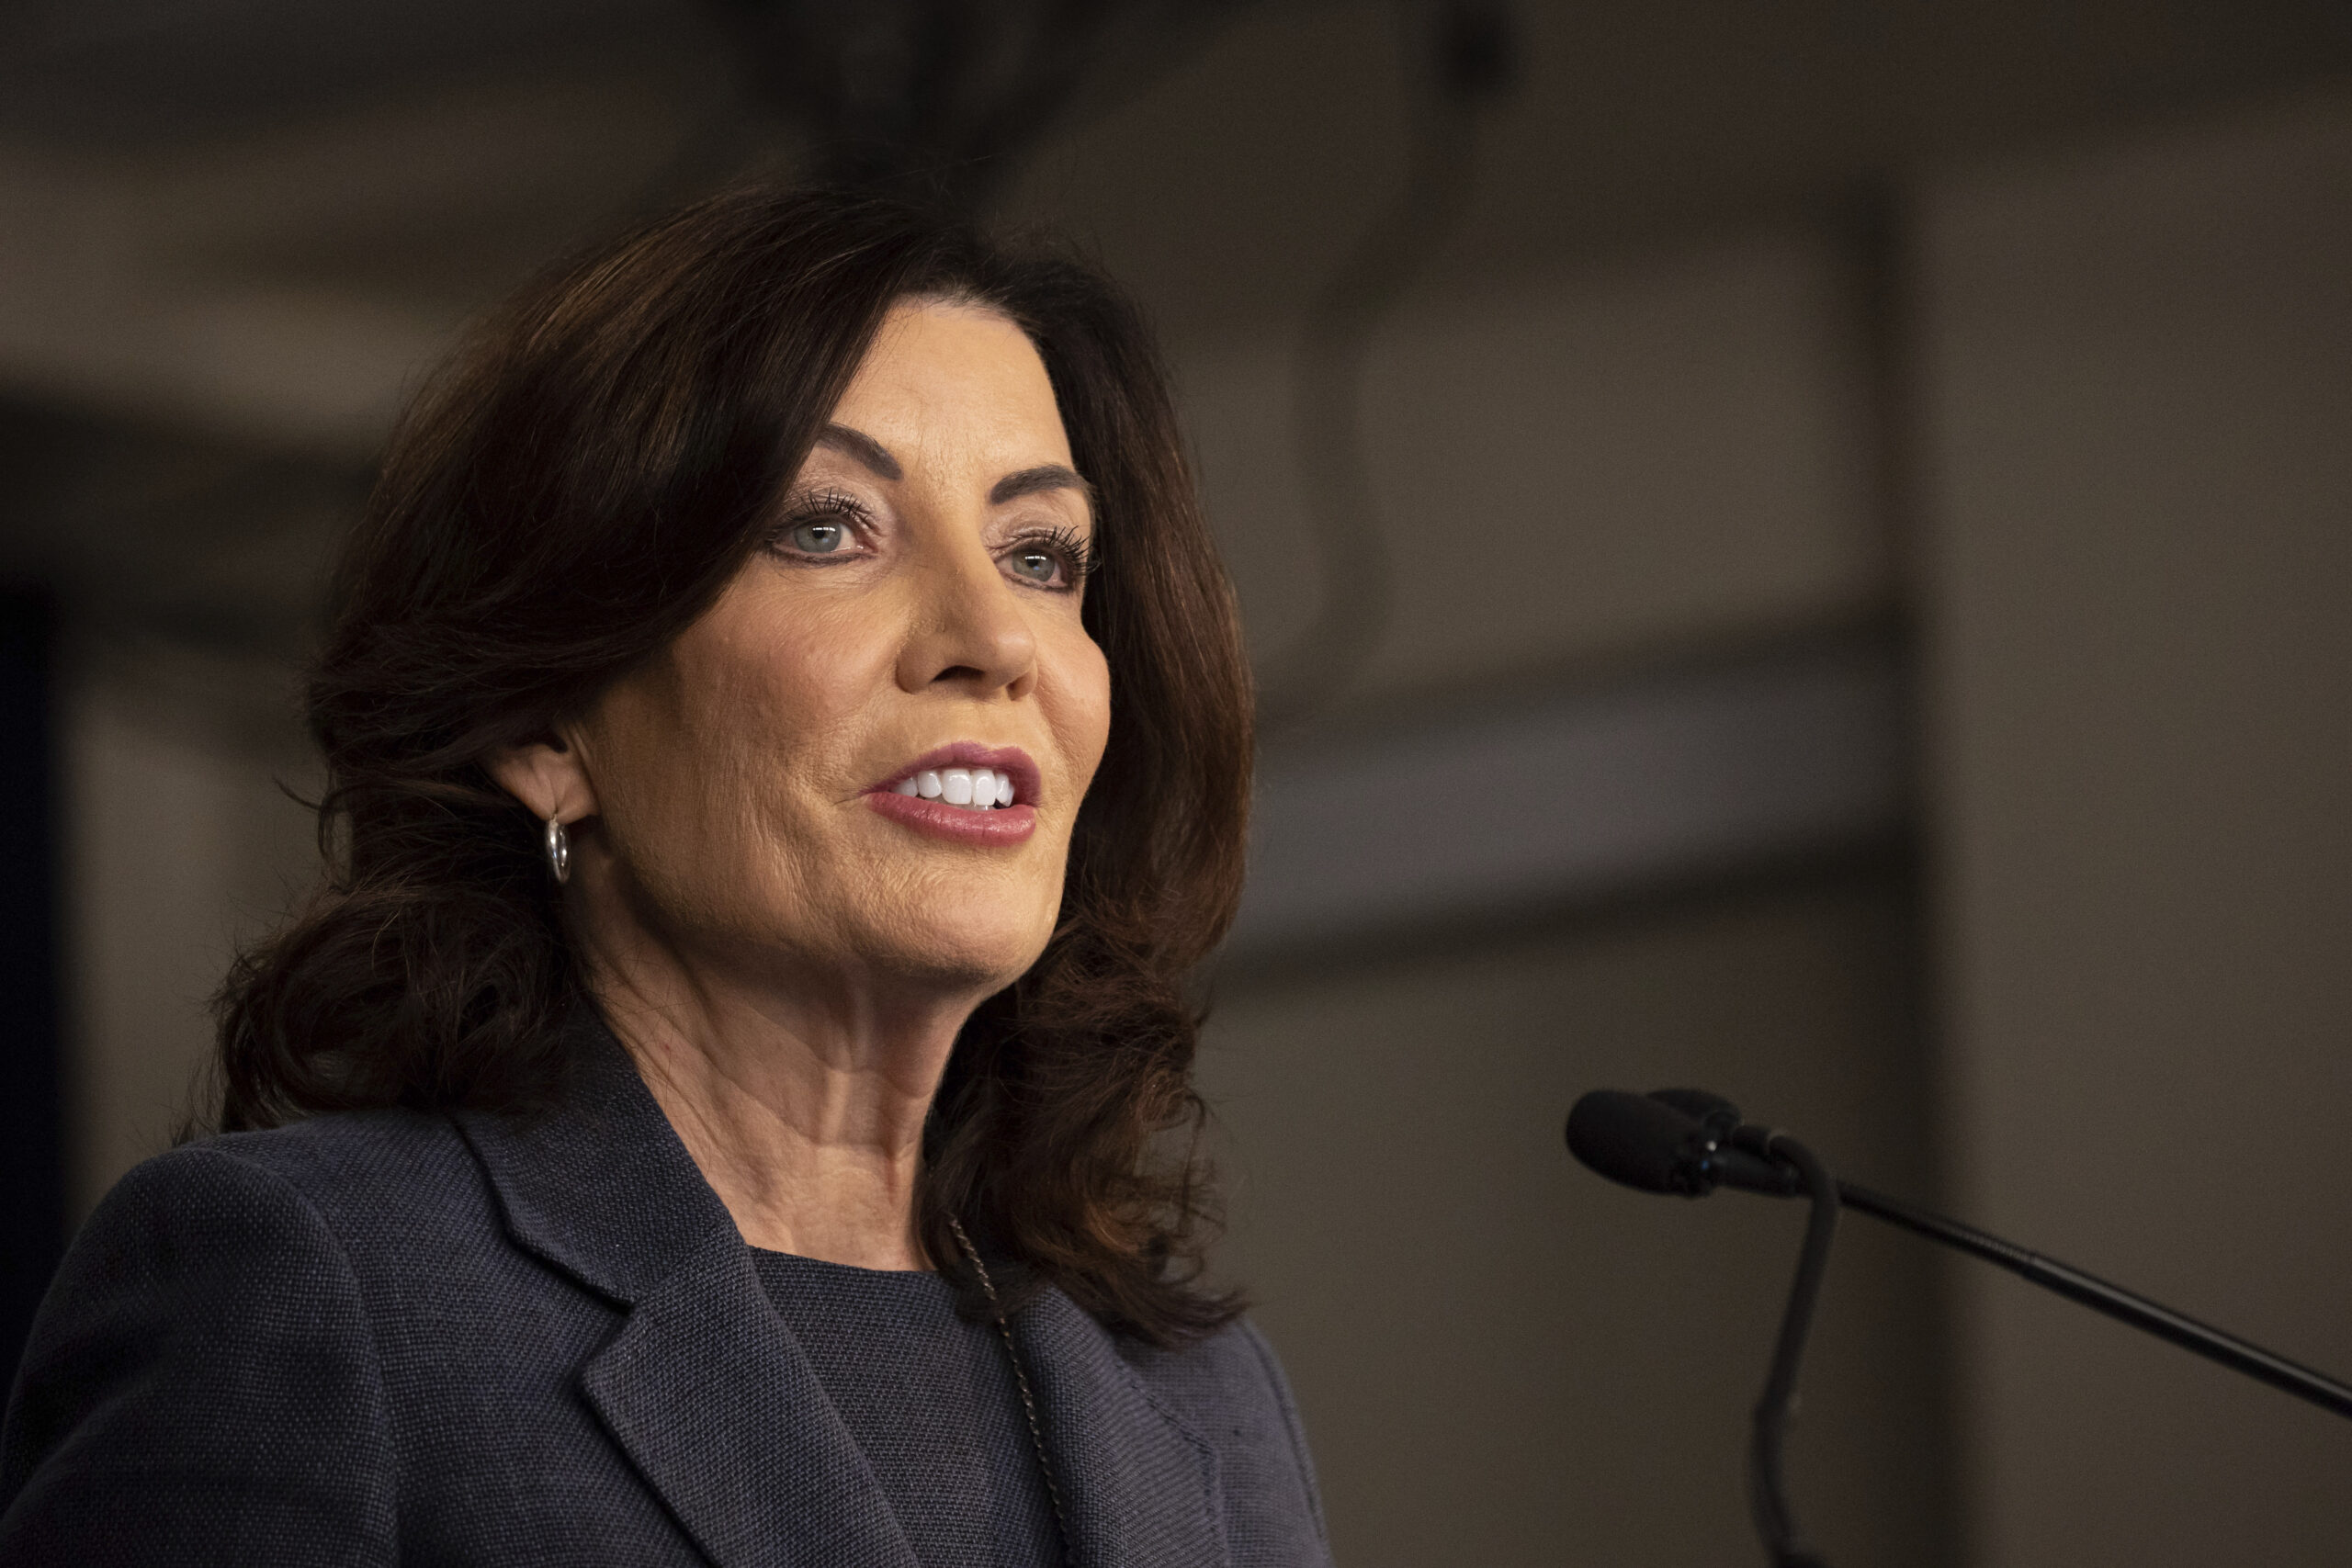 Gov. Kathy Hochul faces criticism from advocacy groups and families for vetoing the Preserving Family Bonds Act, a bill aimed at maintaining family connections for children in the foster system.